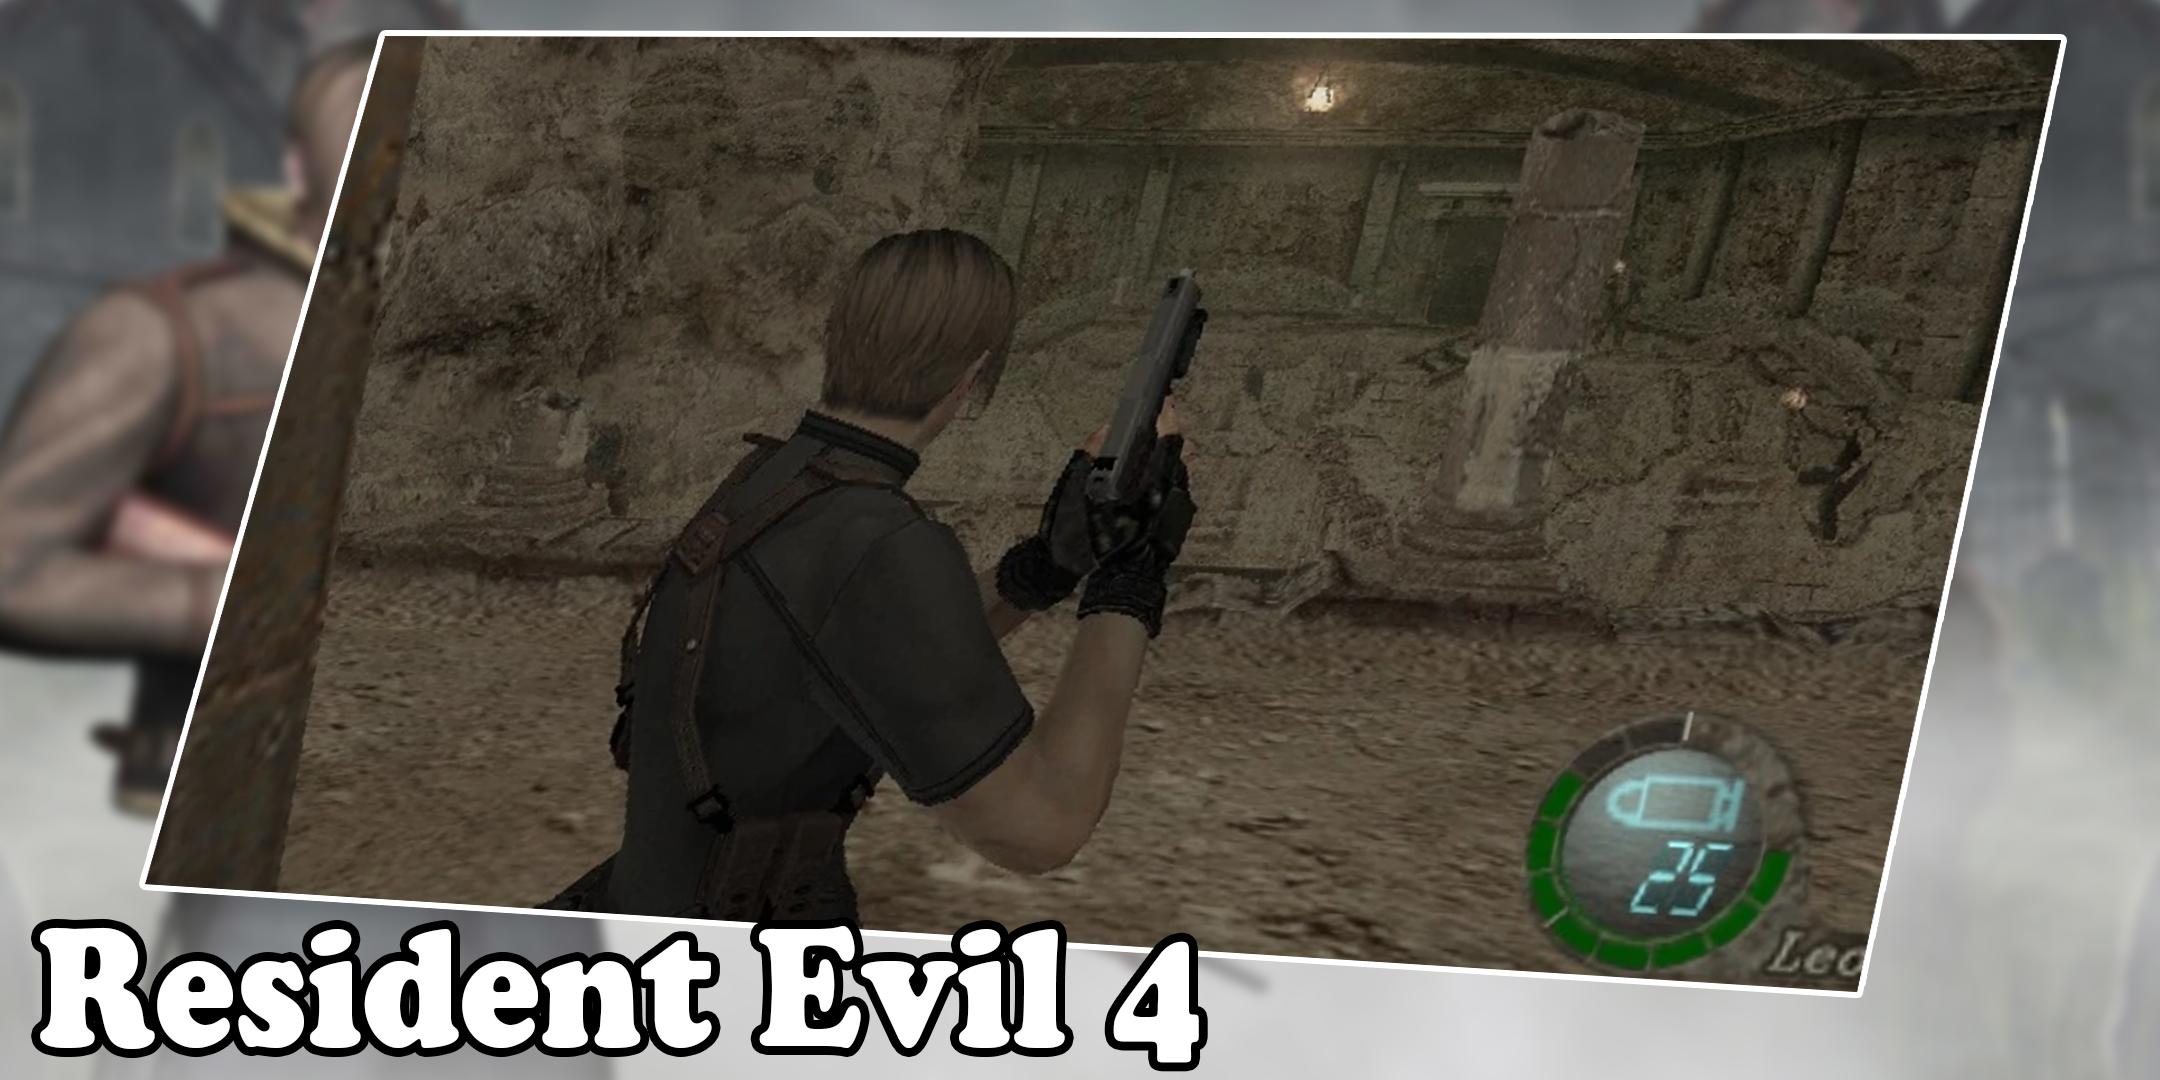 Free Resident Evil 4 tips 2019 for Android - APK Download